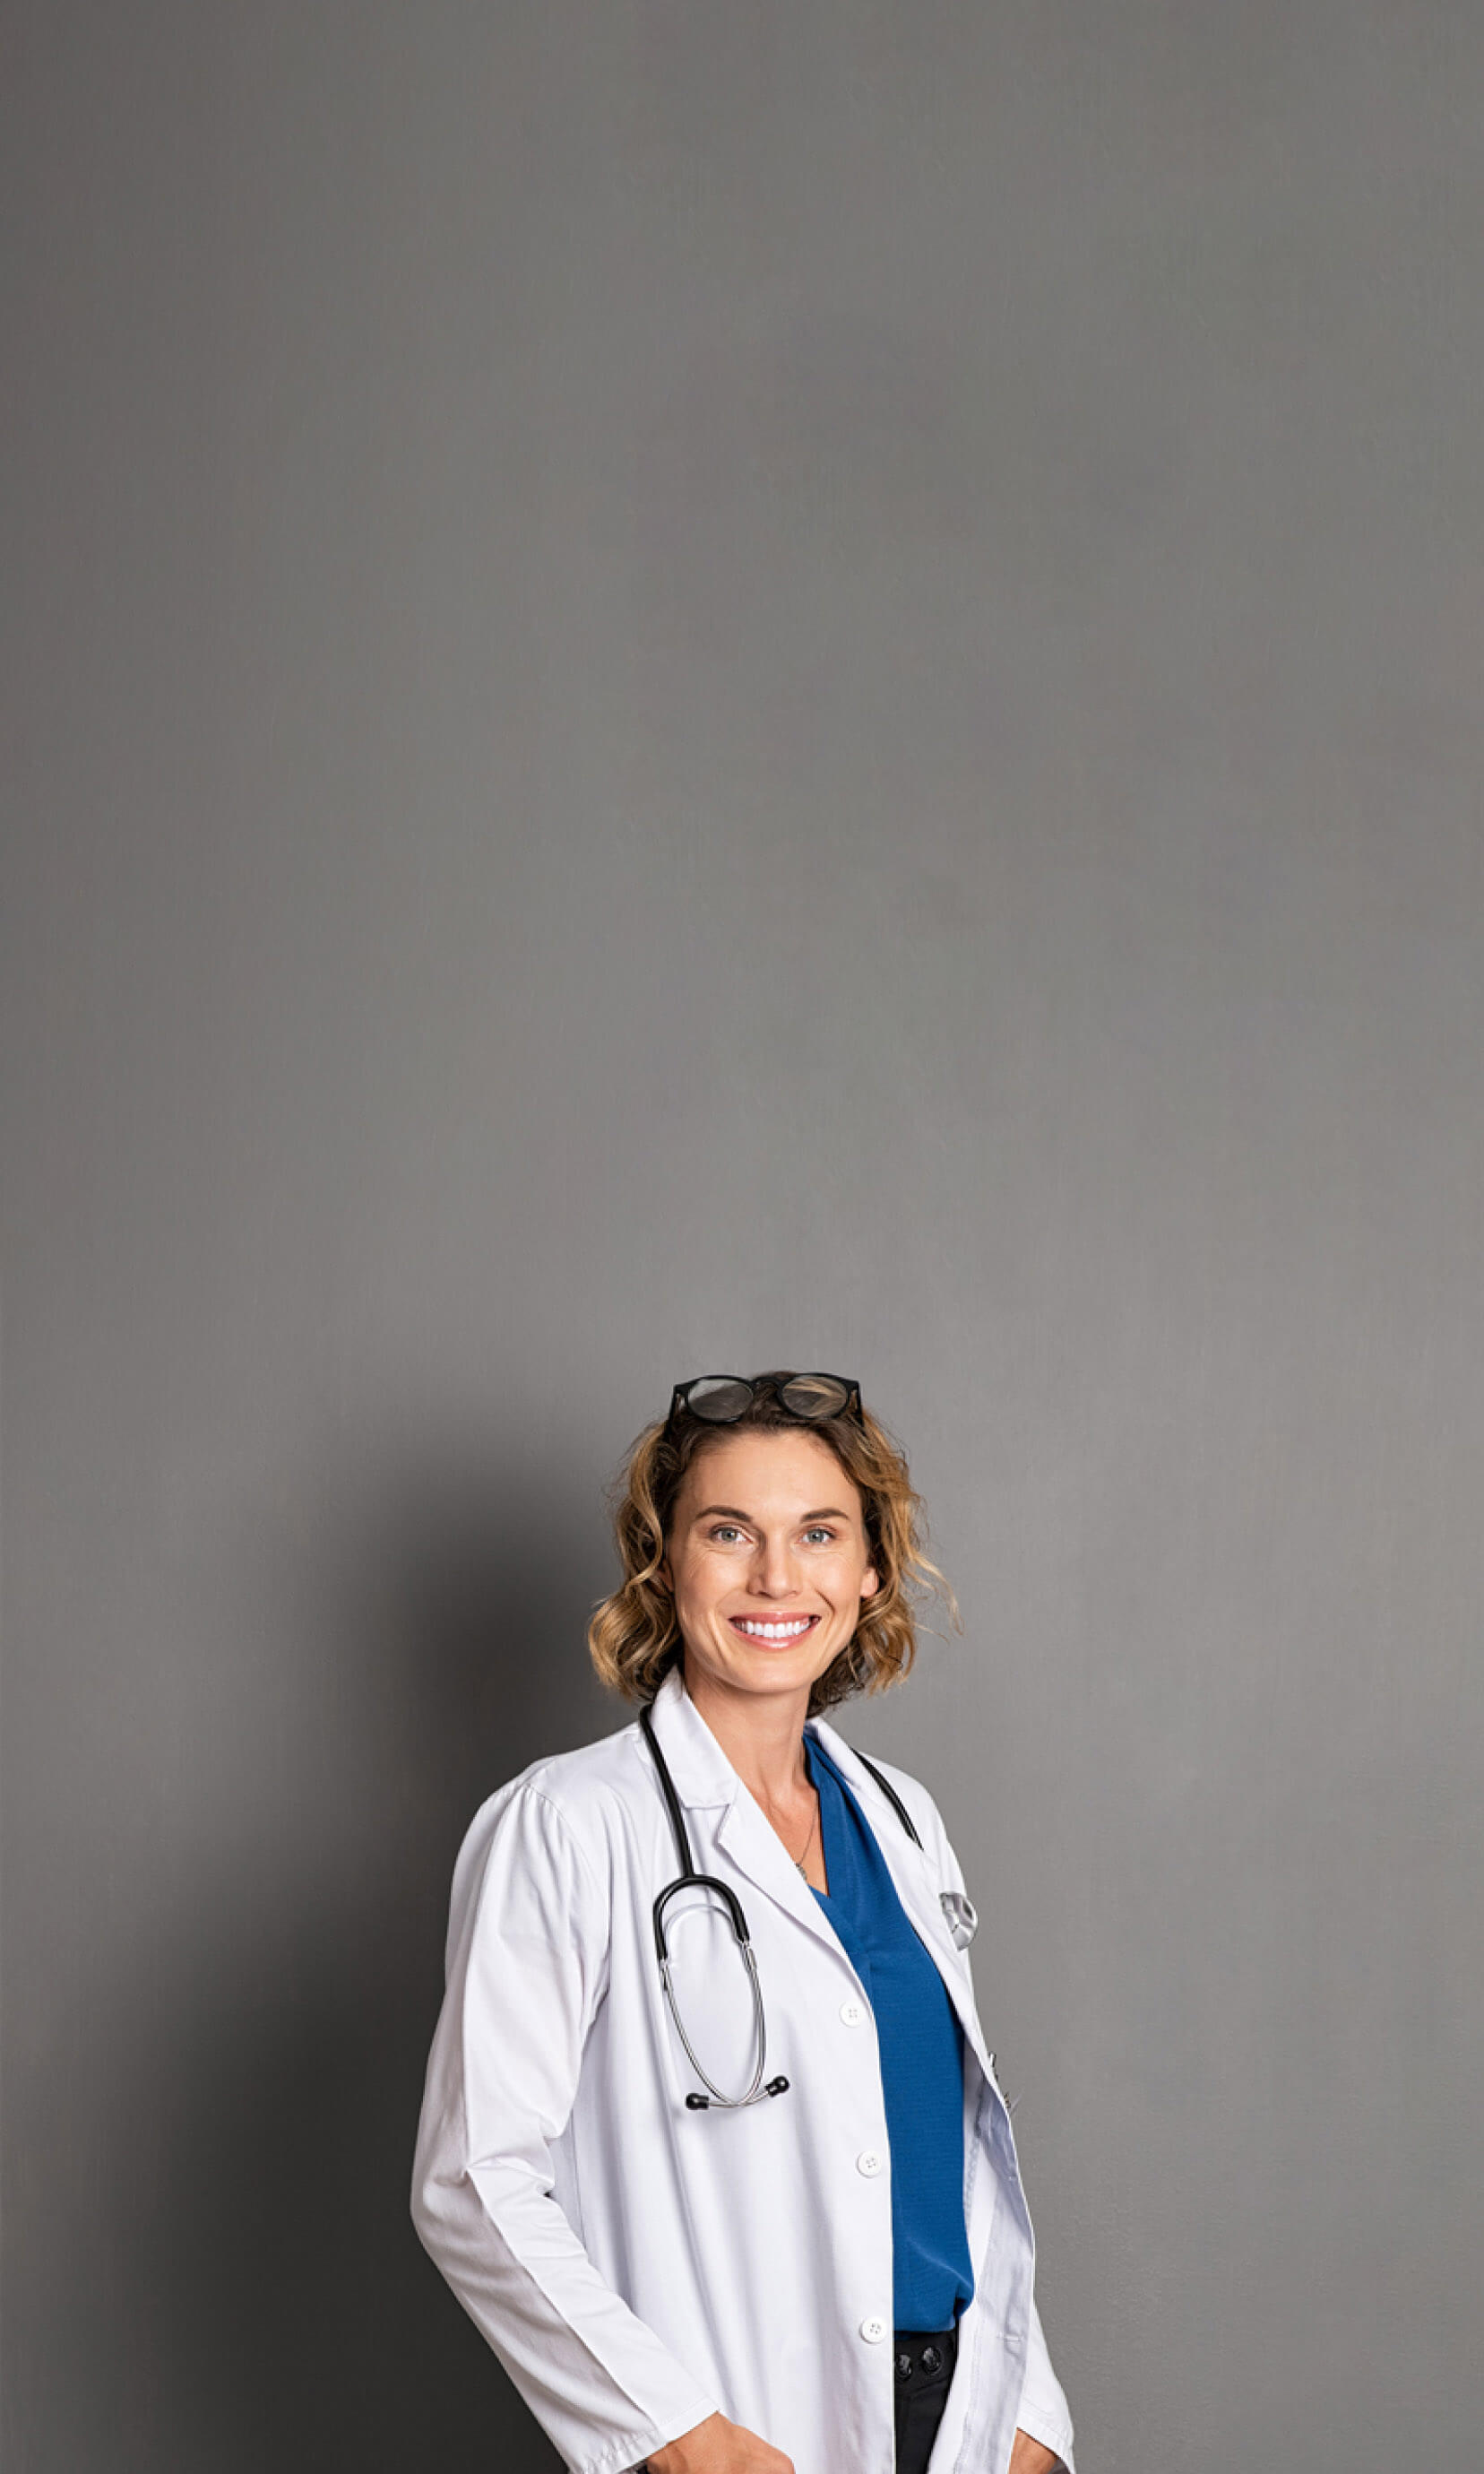 Professional portrait of a doctor